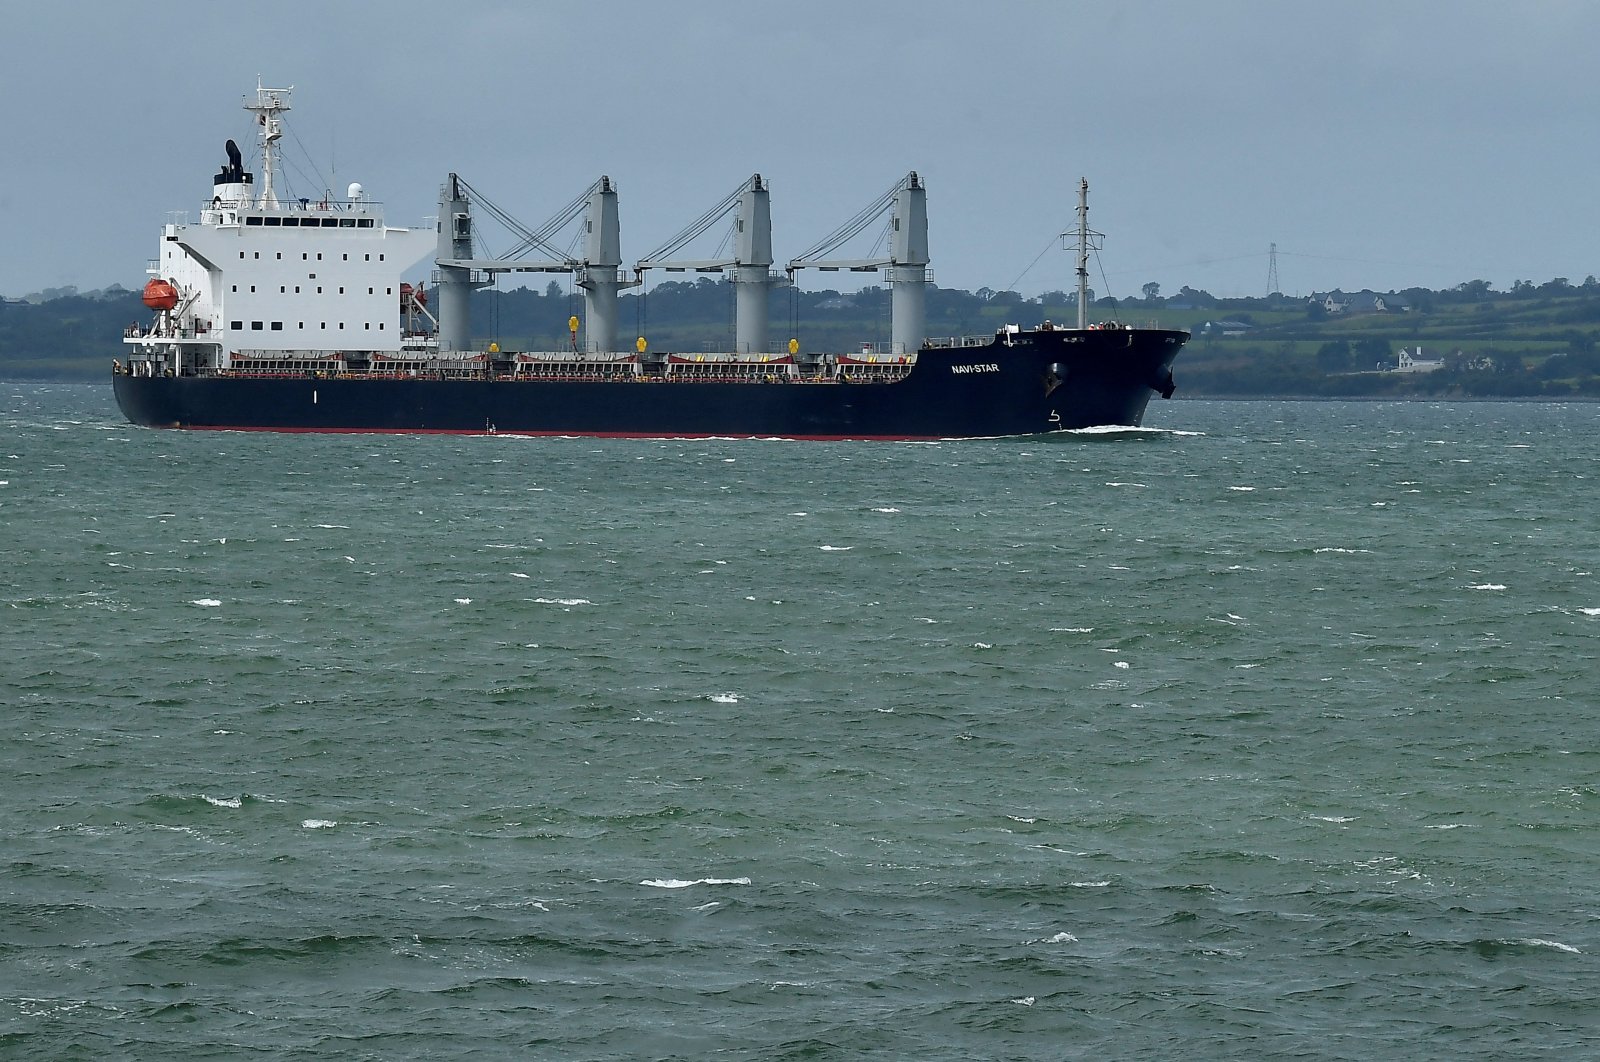 The Panama-flagged bulk carrier ship Navi Star arrives at Foynes Port to deliver 33,000 tons of Ukrainian corn to Ireland after departing from Odessa following the formation of the Black Sea grain initiative, in Foynes, Ireland, Aug. 20, 2022. (Reuters Photo)